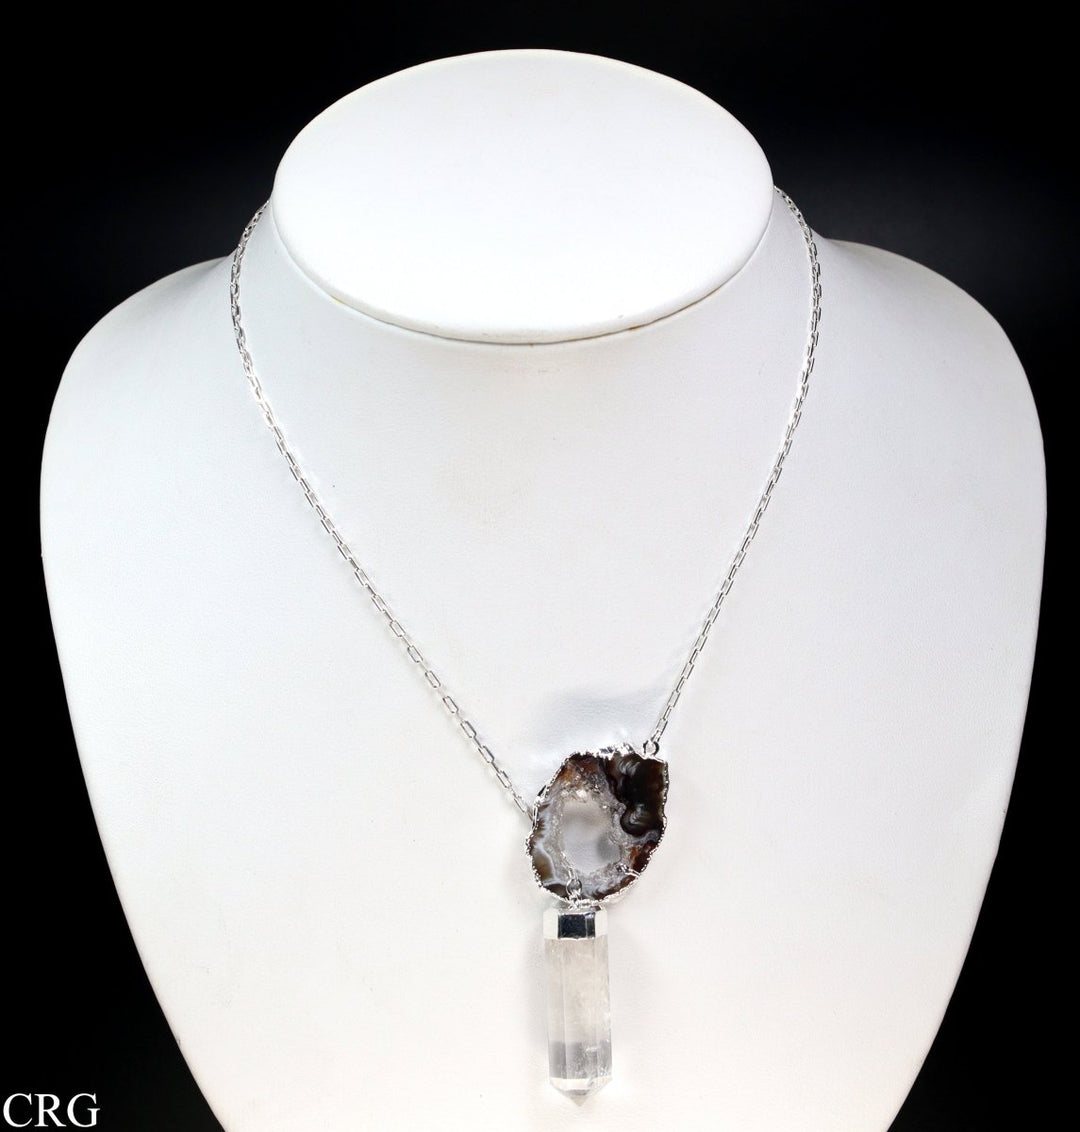 Oco Geode Necklace with Clear Quartz Point and Silver Plating (1 Piece) Size 24 Inches Crystal Jewelry Charm